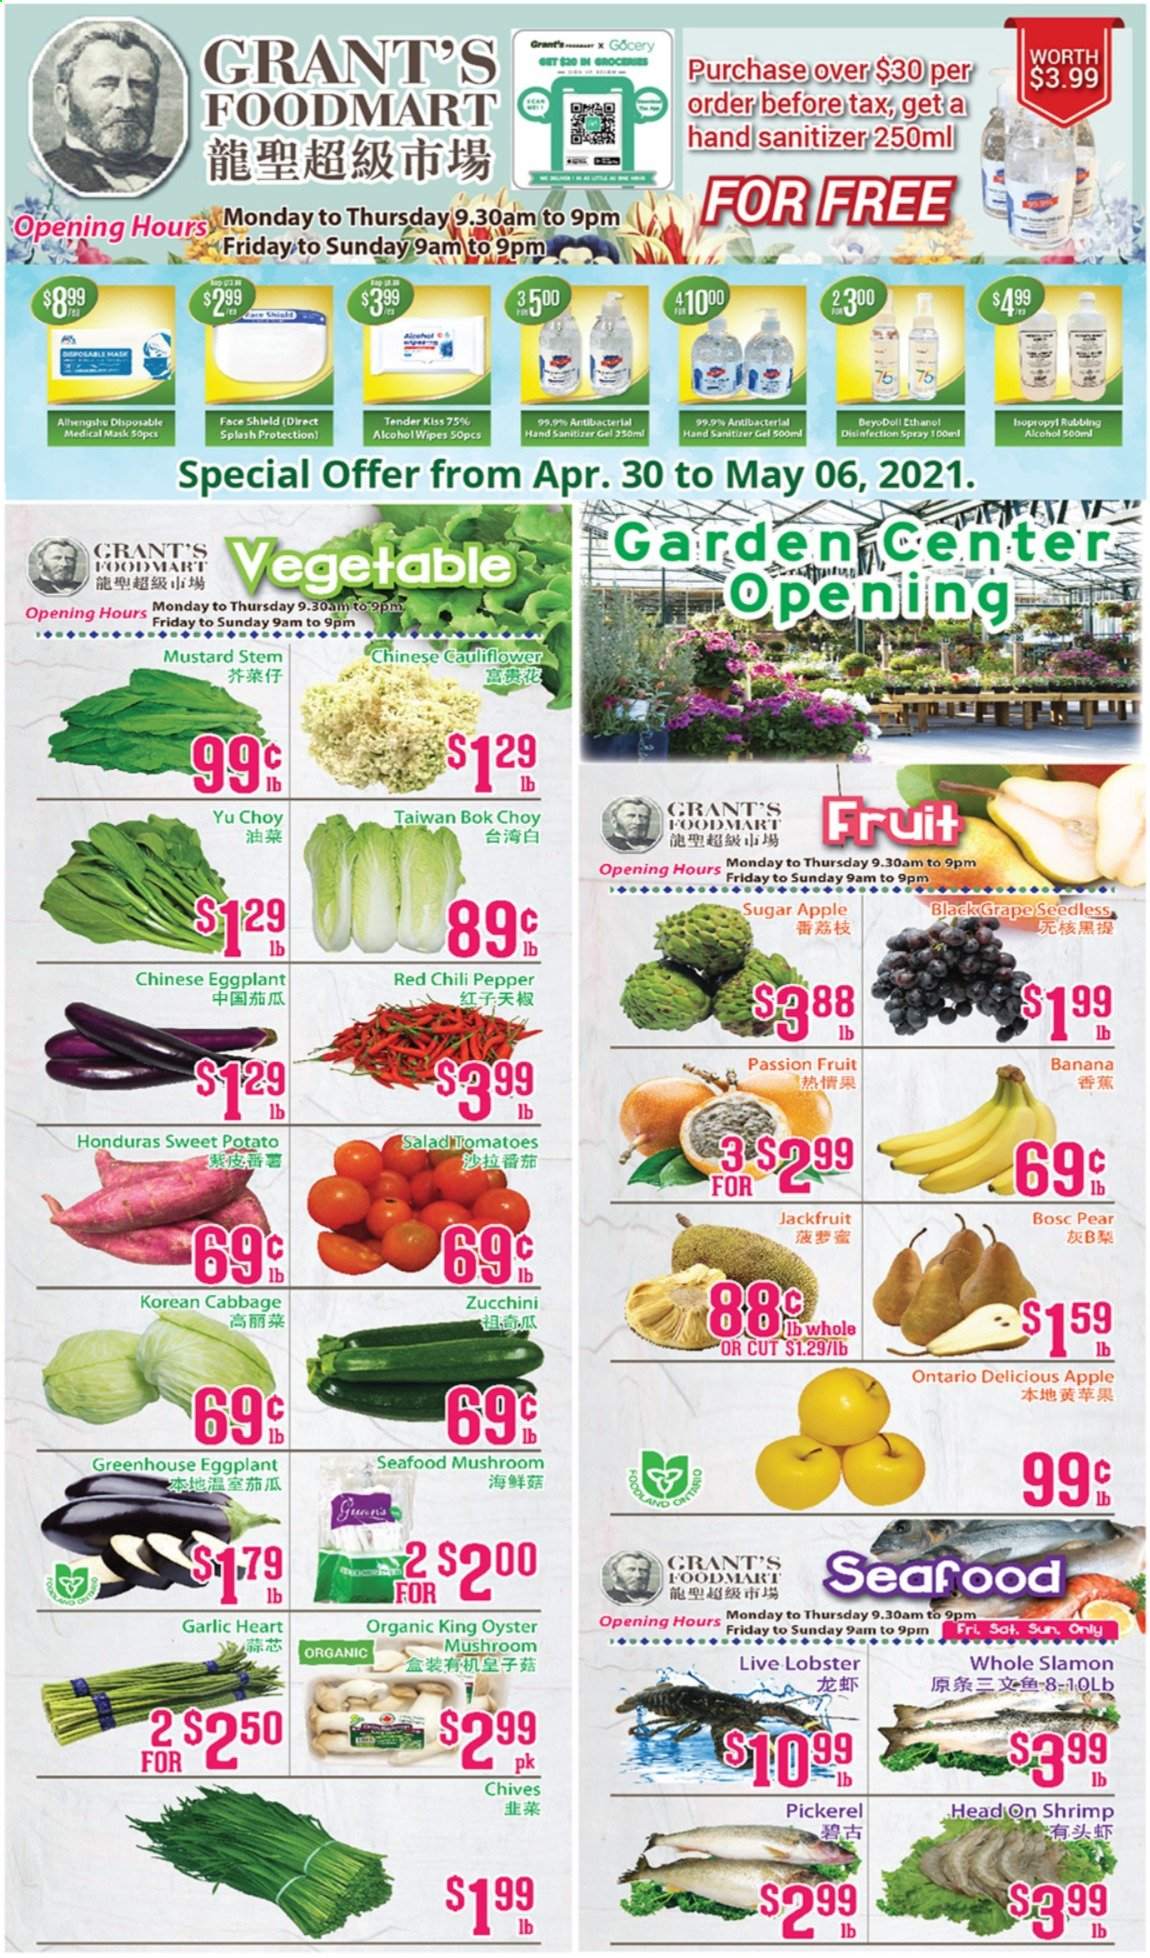 thumbnail - Grant's Foodmart Flyer - April 30, 2021 - May 06, 2021 - Sales products - oyster mushrooms, mushrooms, bok choy, cabbage, cauliflower, garlic, sweet potato, tomatoes, zucchini, salad, eggplant, chives, pears, lobster, oysters, seafood, shrimps, walleye, sugar, pepper, mustard, Grant's, wipes, hand sanitizer. Page 1.